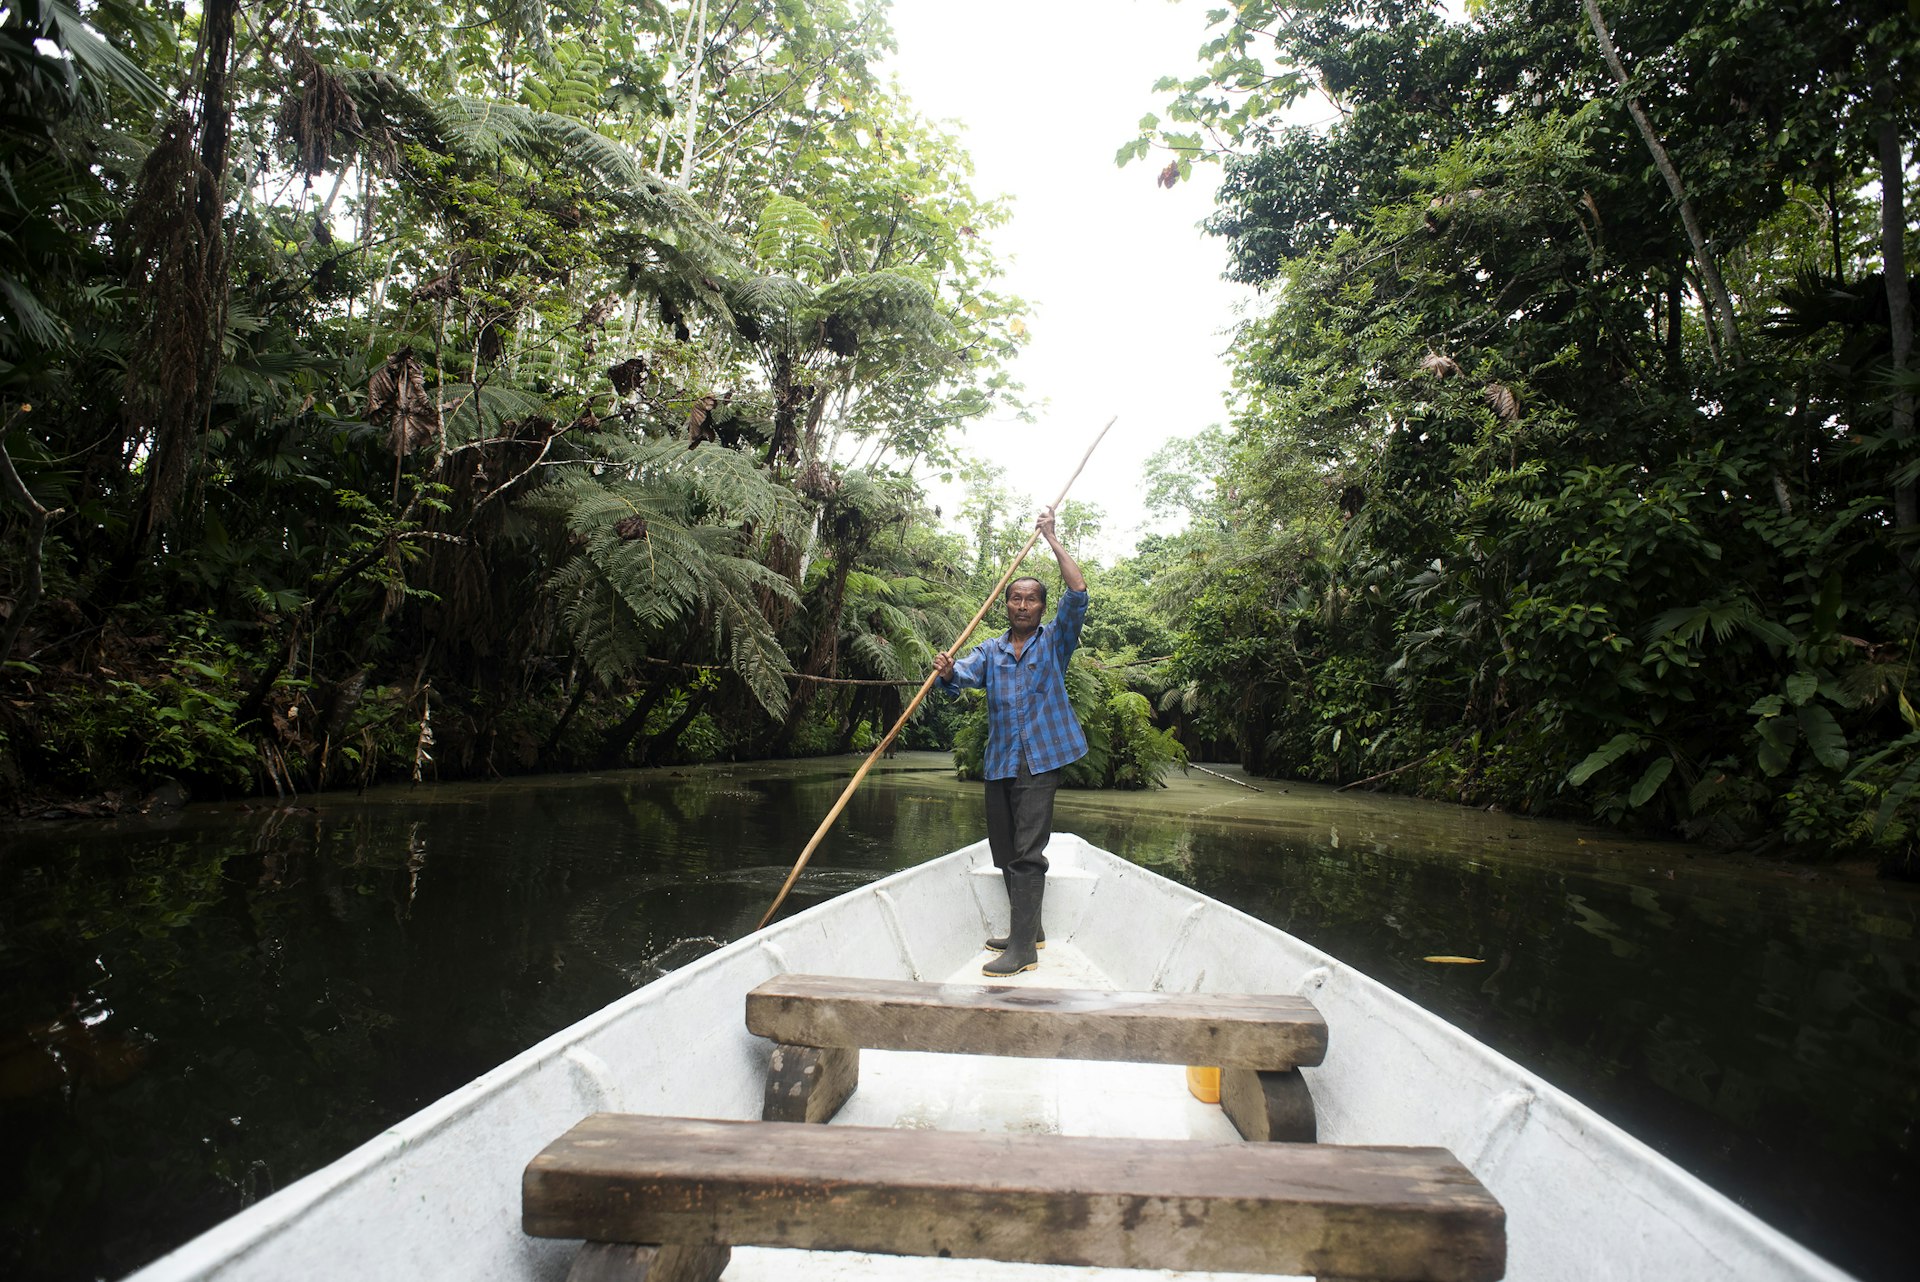 A senior man steers a canoe down a river with jungle either side